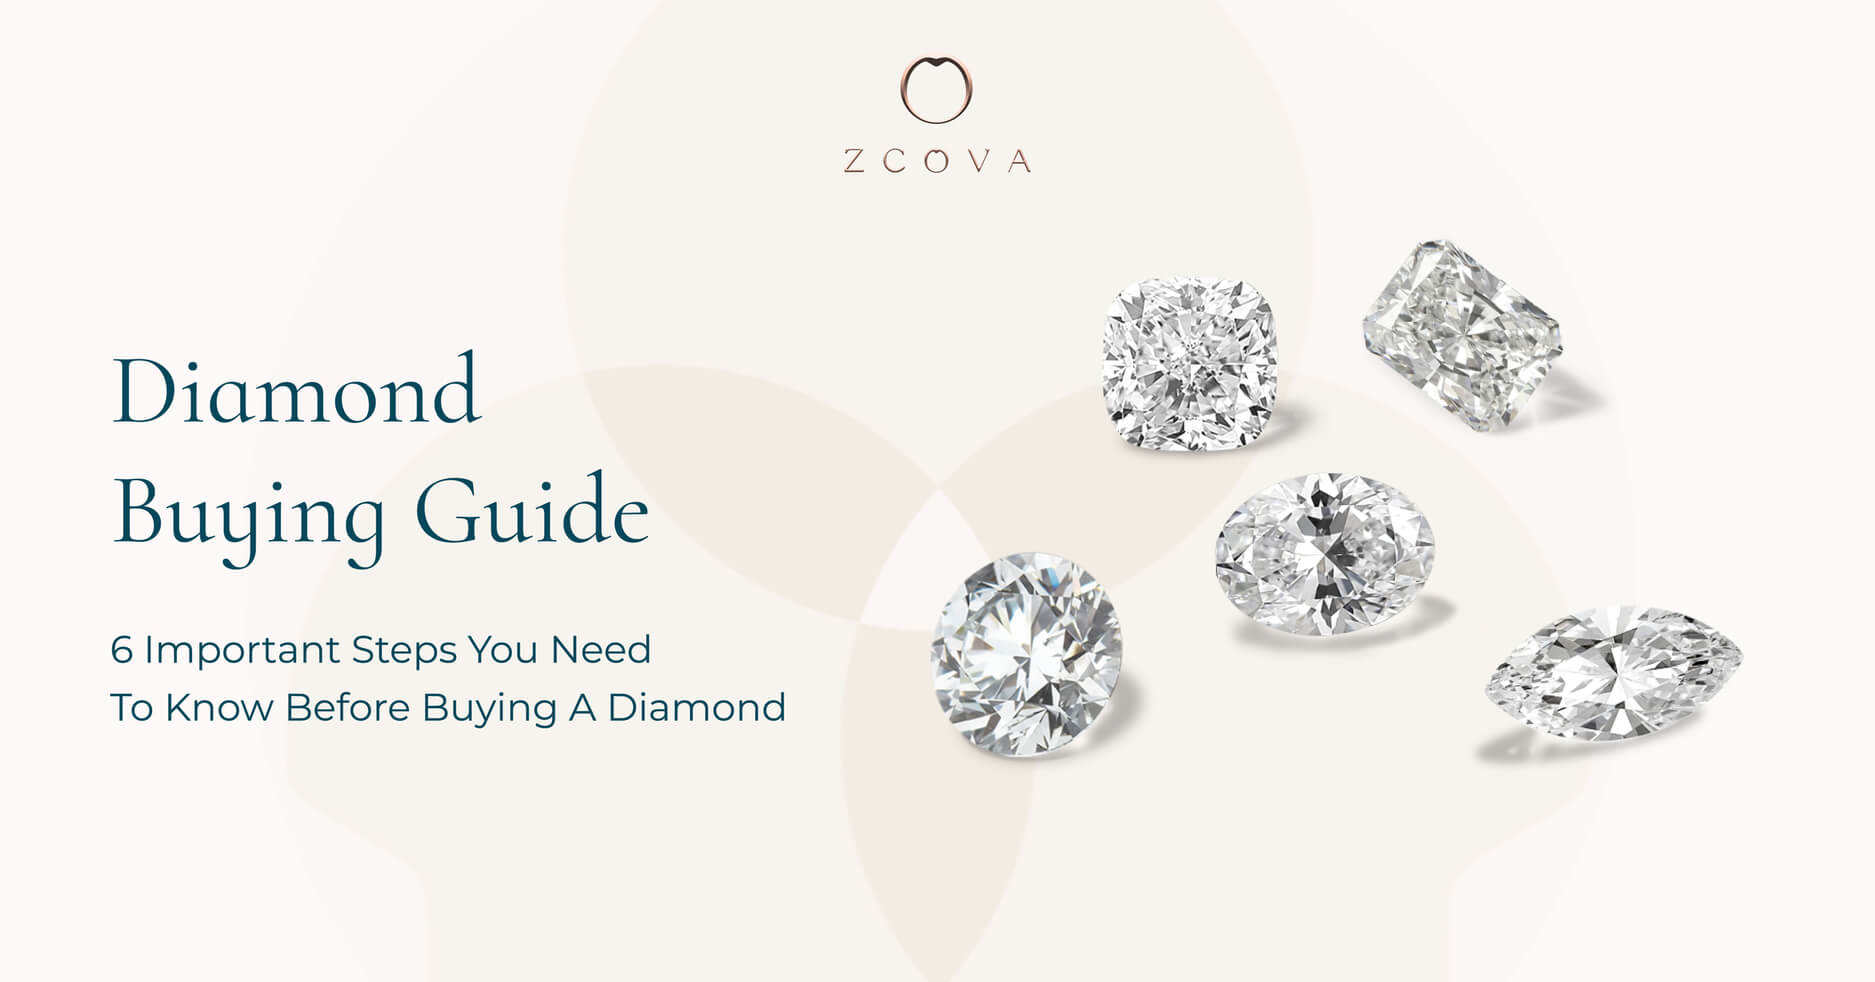 Blog banner image with loose diamonds in various cuts such as round cut, oval, marquise, emerald, and cushion cut